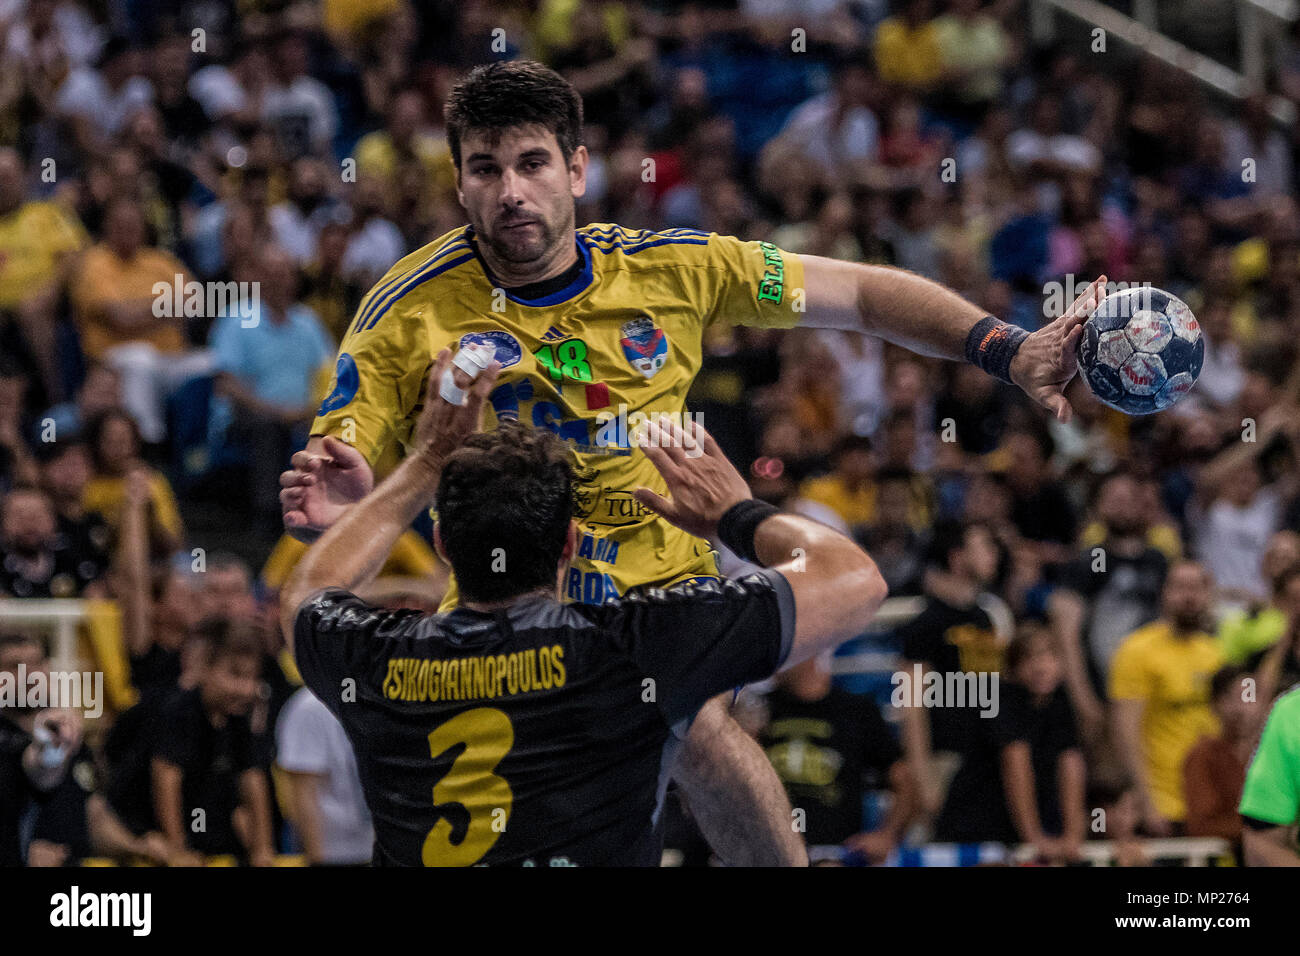 Athens, Greece. 20th May, 2018. AHC Potaissa Turda's Cristian Adomnicai (Back) competes during the EHF Men's Challenge Cup Finals between A.E.K. Athens and AHC Potaissa Turda in Athens, Greece, May 20, 2018. Credit: Panagiotis Moschandreou/Xinhua/Alamy Live News Stock Photo